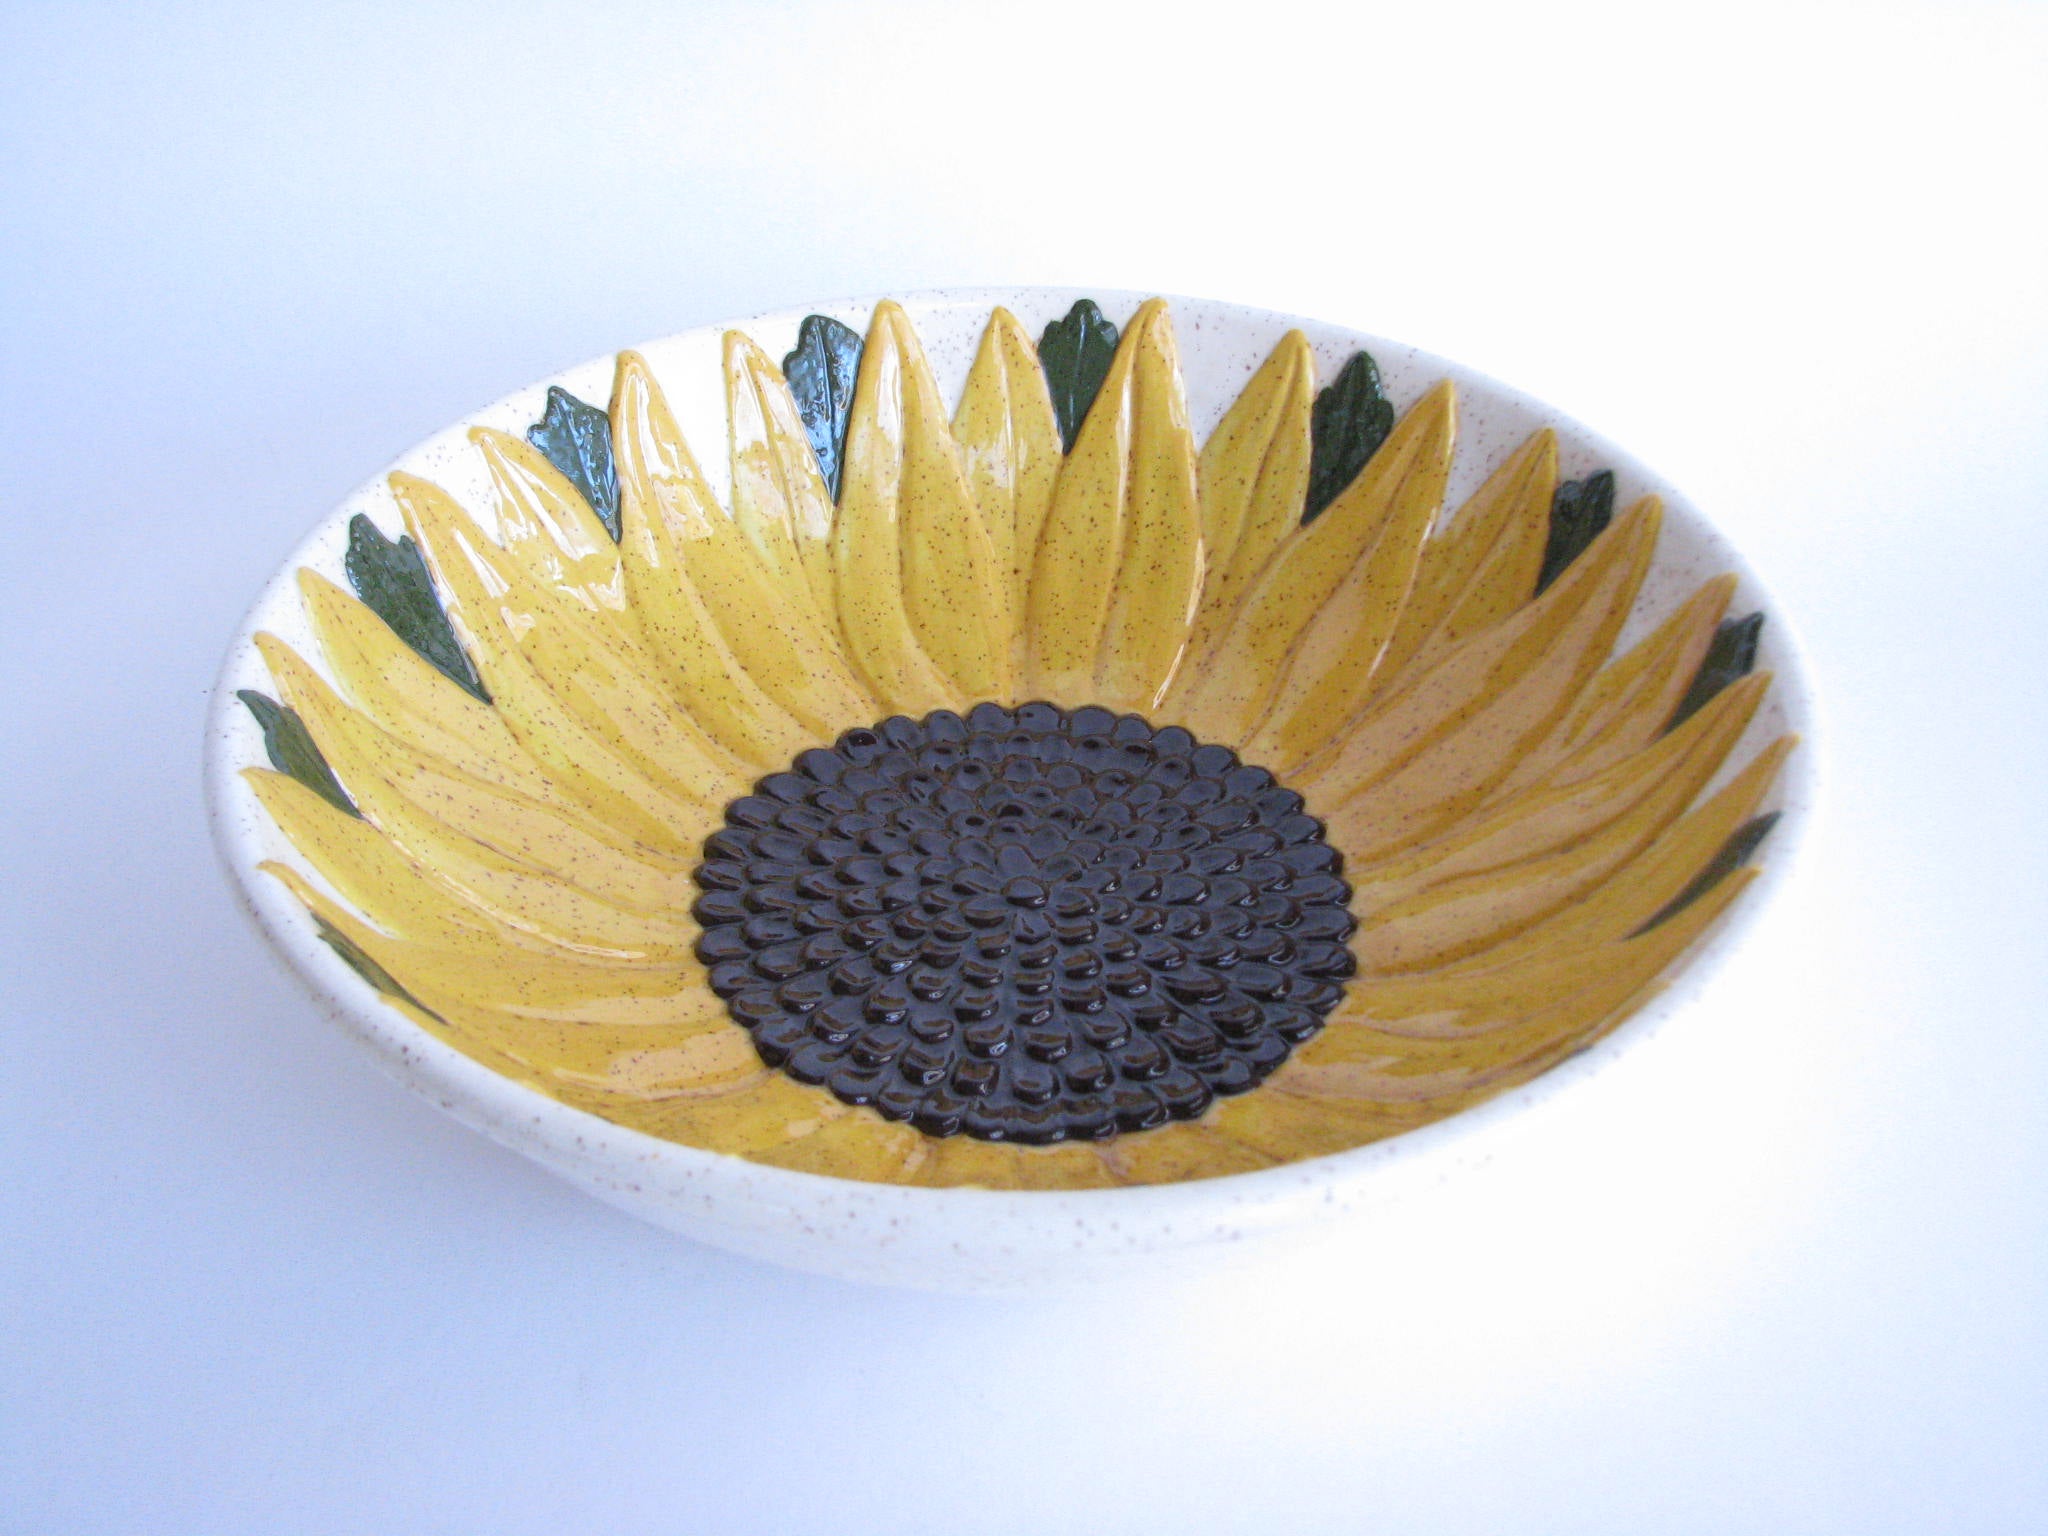 edgebrookhouse - Vintage Ceramic Serving Bowl with Embossed Sunflower